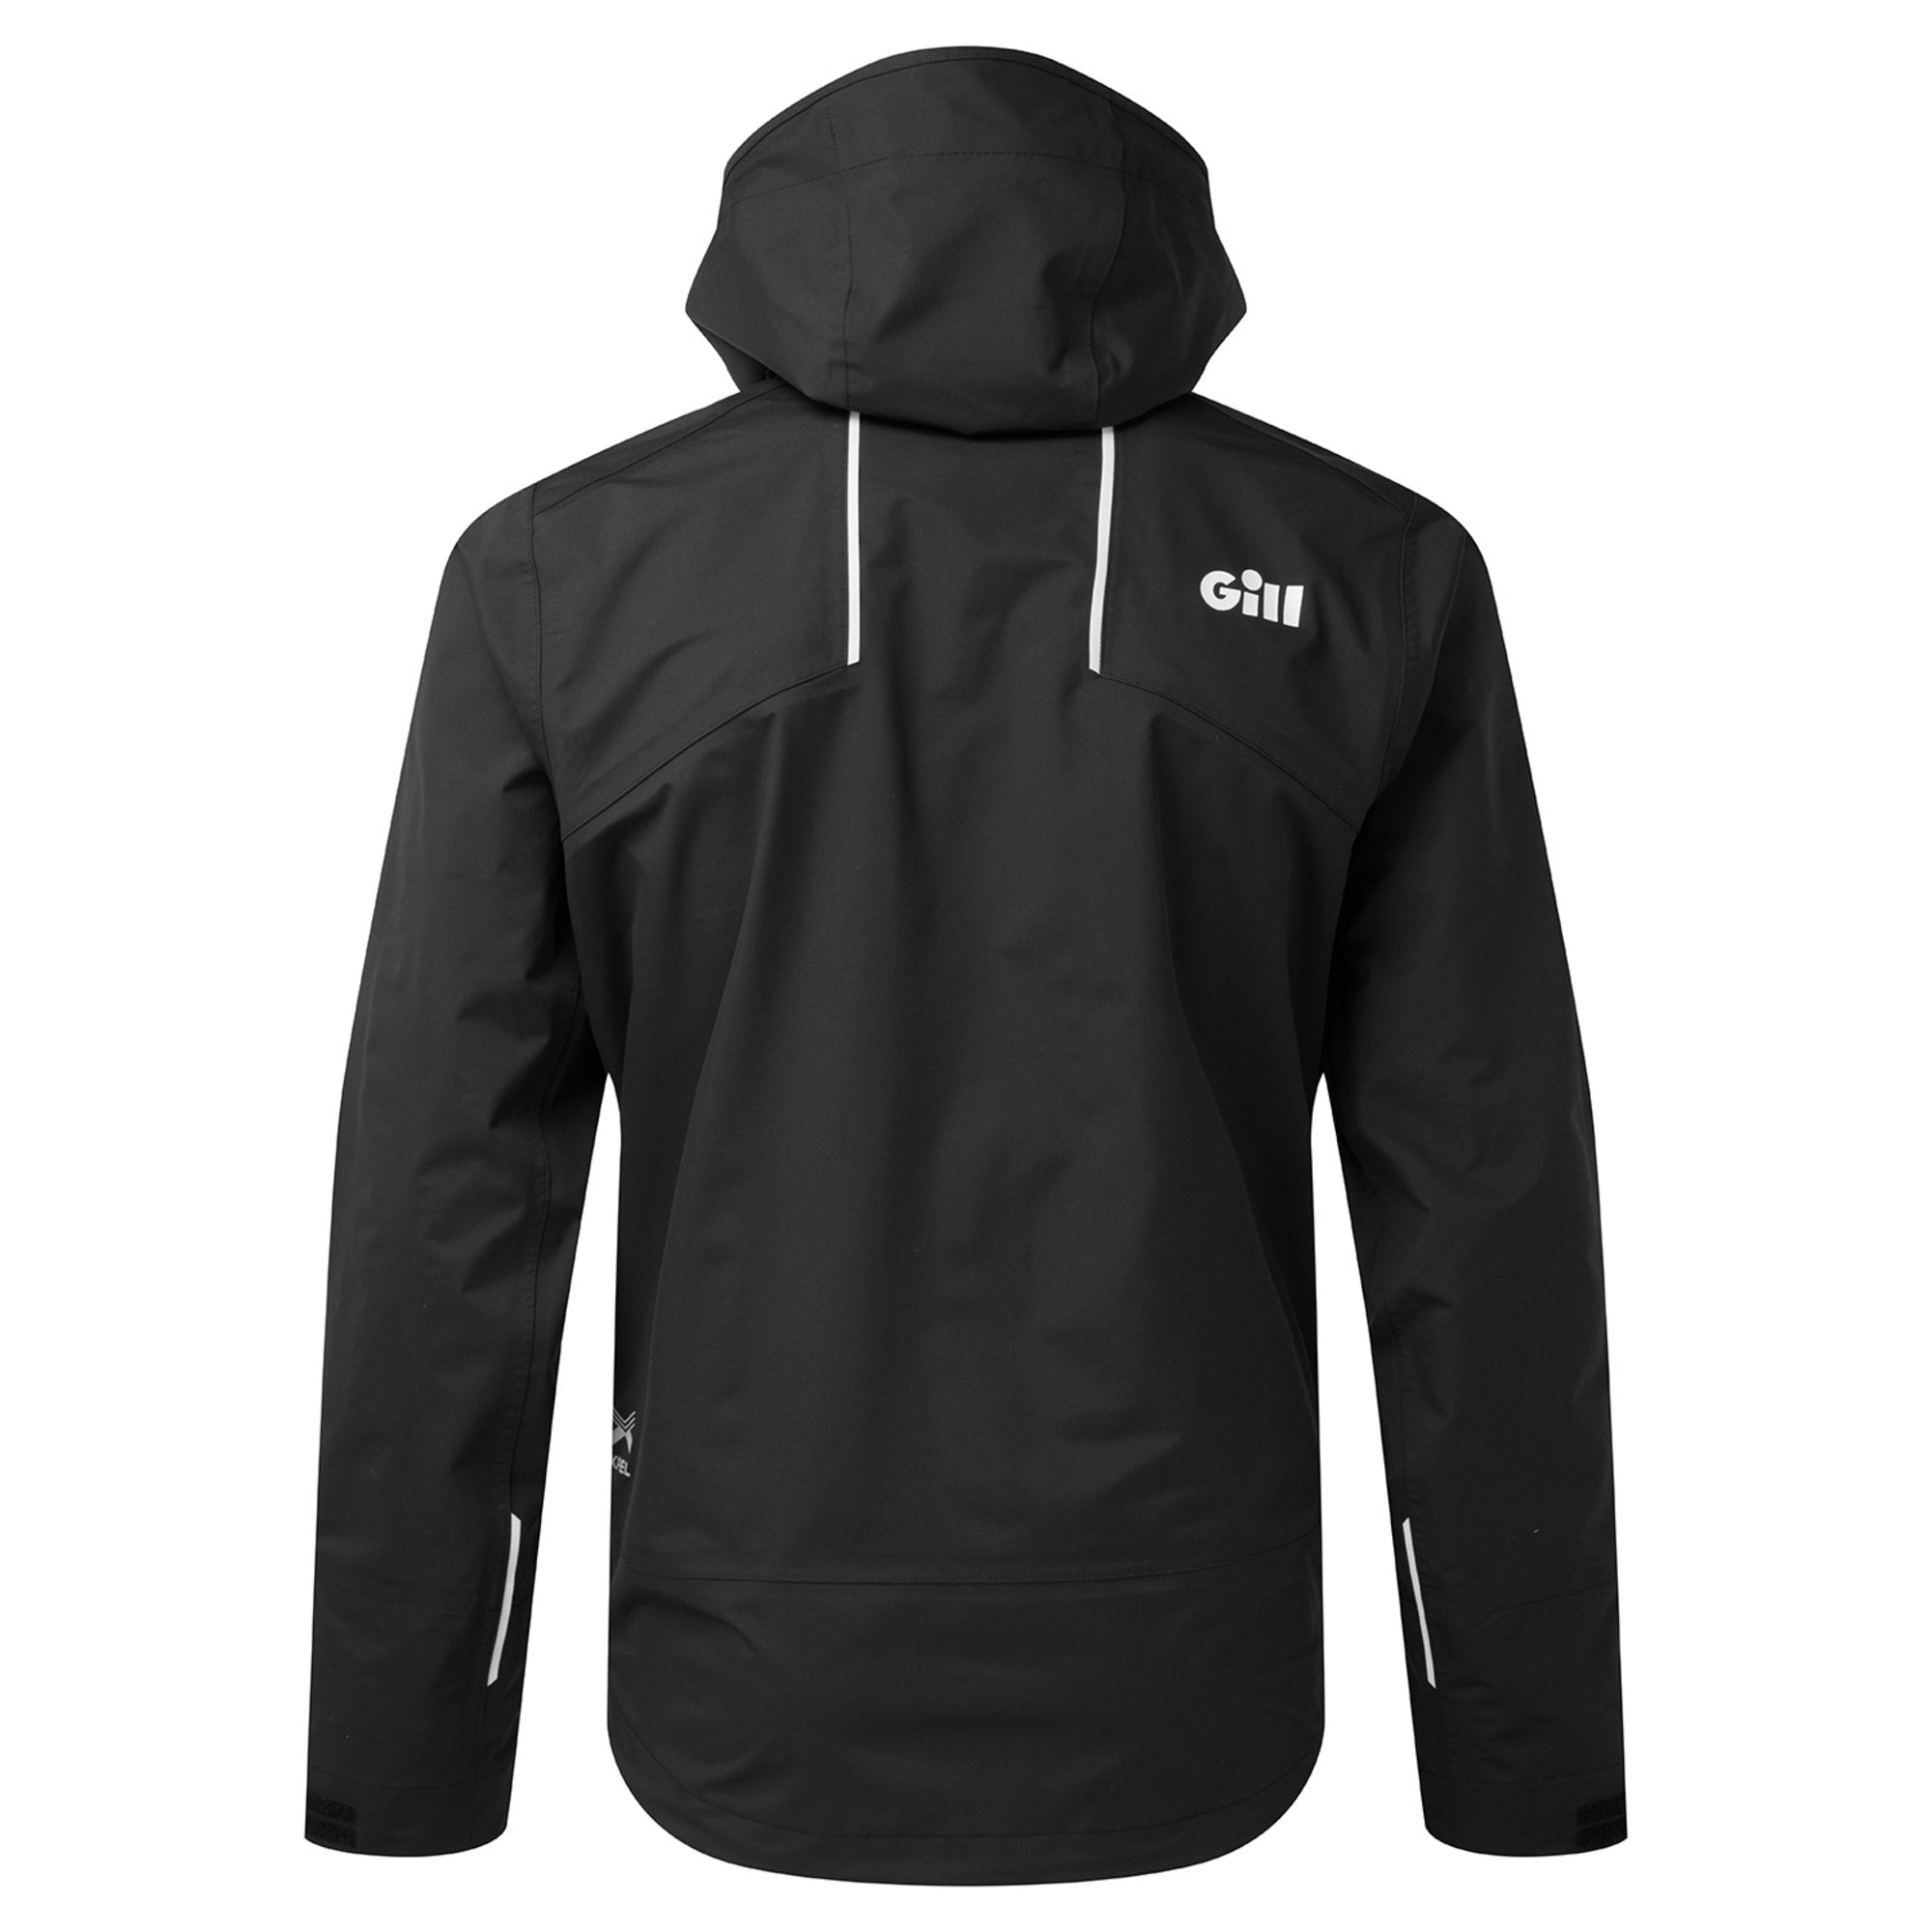 Gill Apex Pro-X Jacket from GILL - CHAOS Fishing